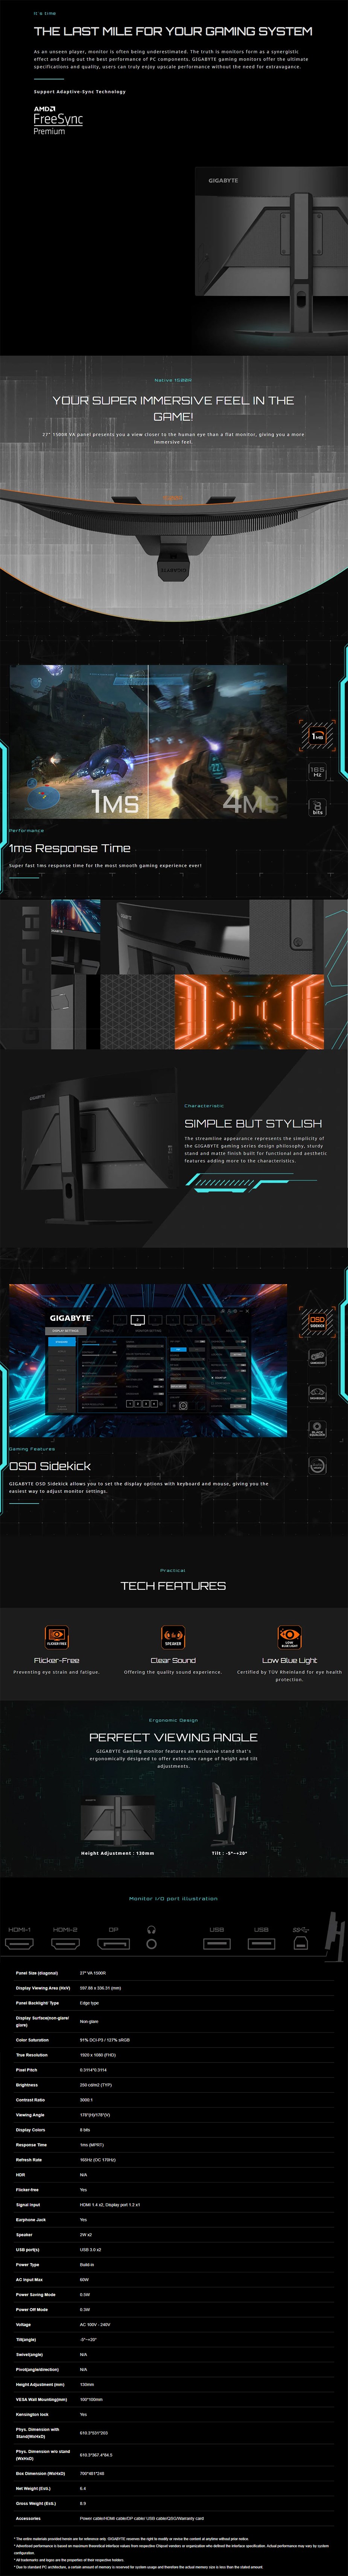 A large marketing image providing additional information about the product Gigabyte G27FC-A 27" Curved FHD 170Hz VA Monitor - Additional alt info not provided